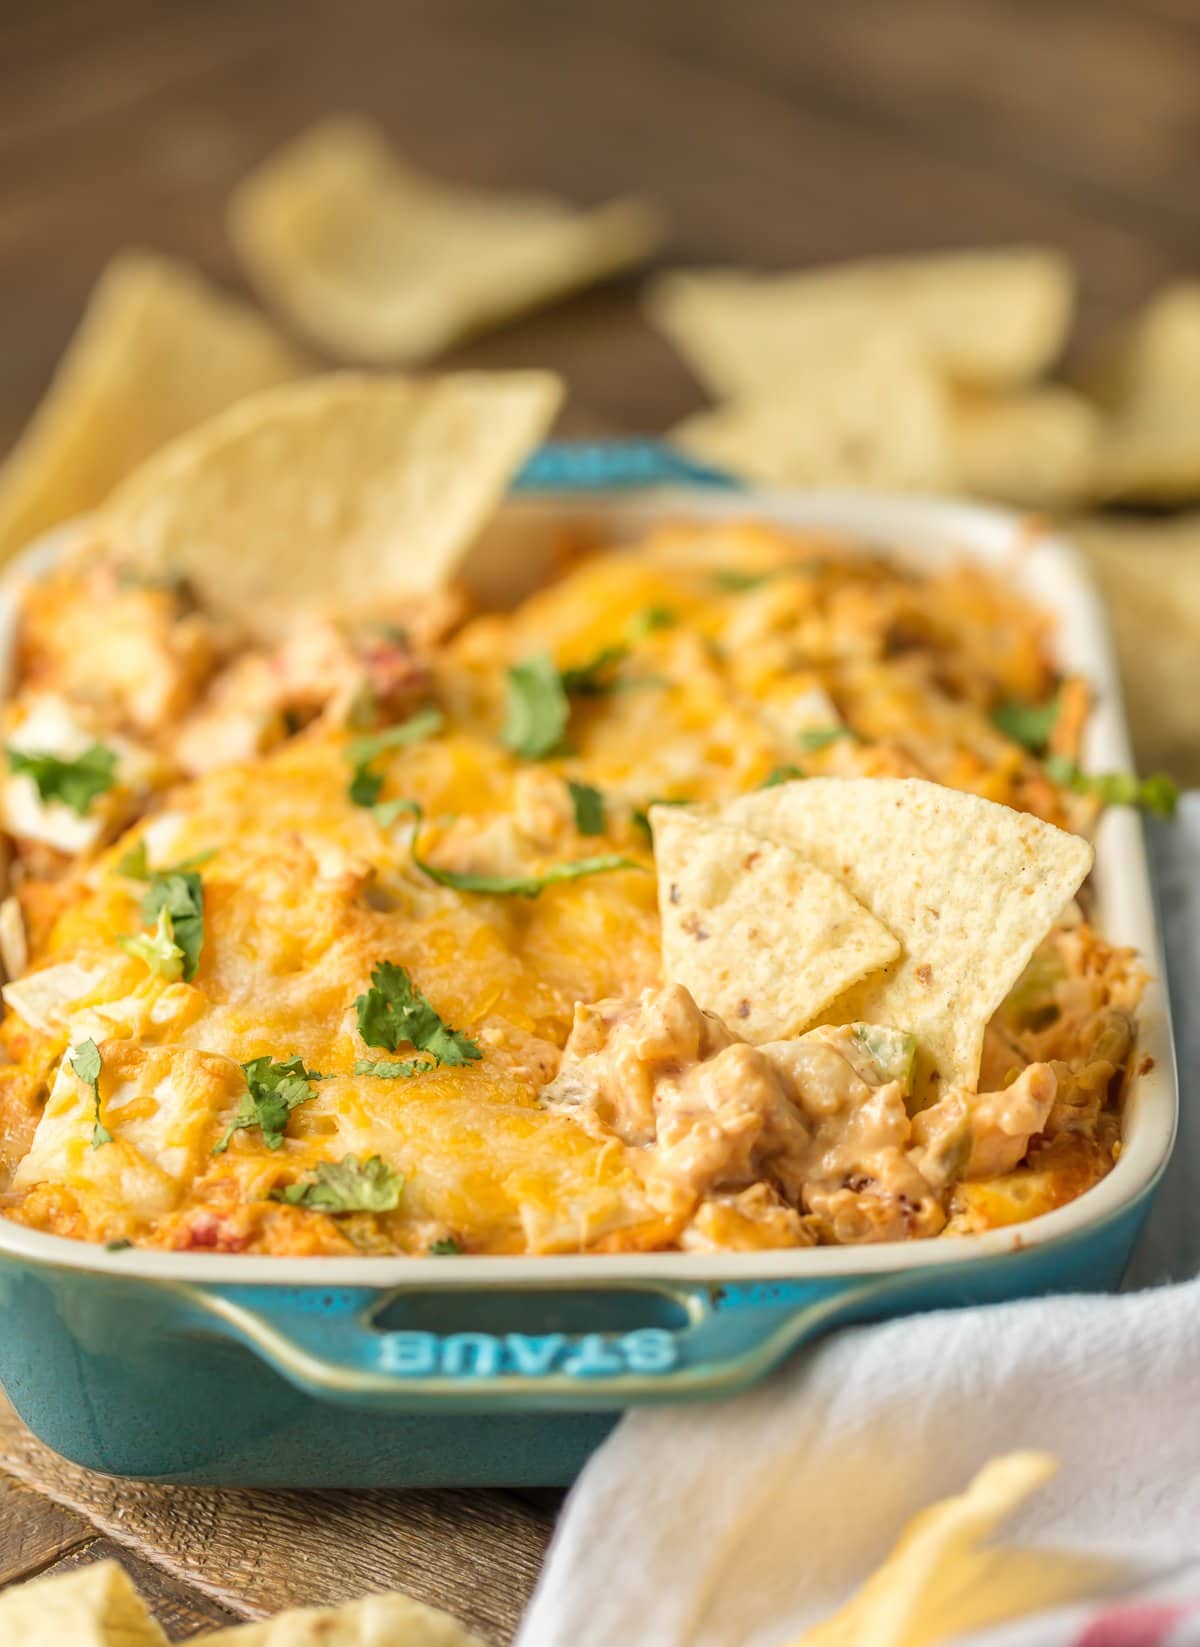 Hot dip recipe in a casserole dish, filled with cheese, chicken, green chiles, rotel, and more